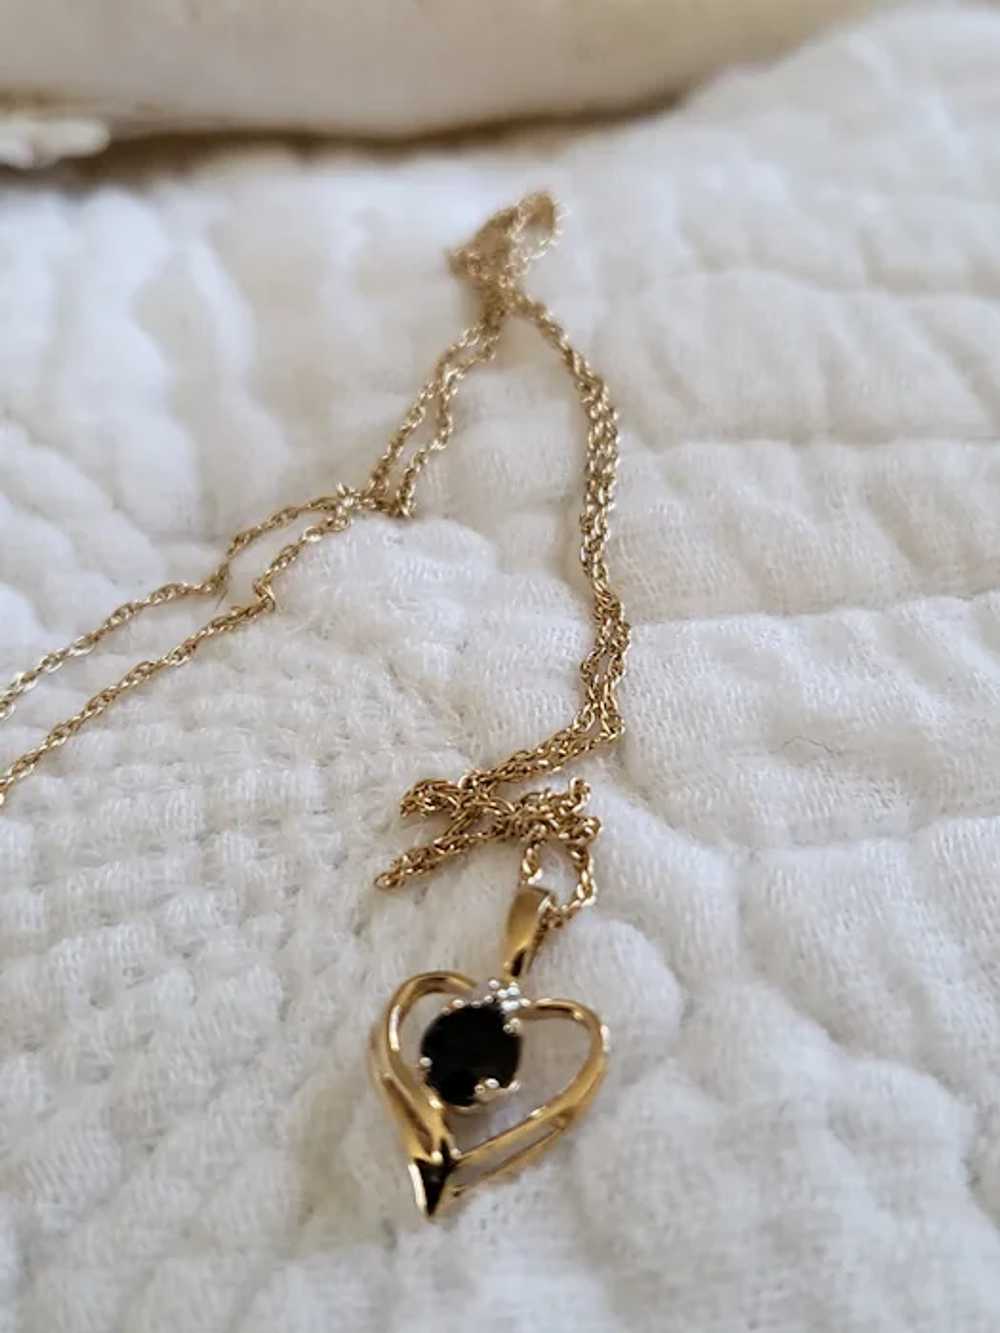 10K Gold Sapphire Heart with 14K Chain Necklace - image 3